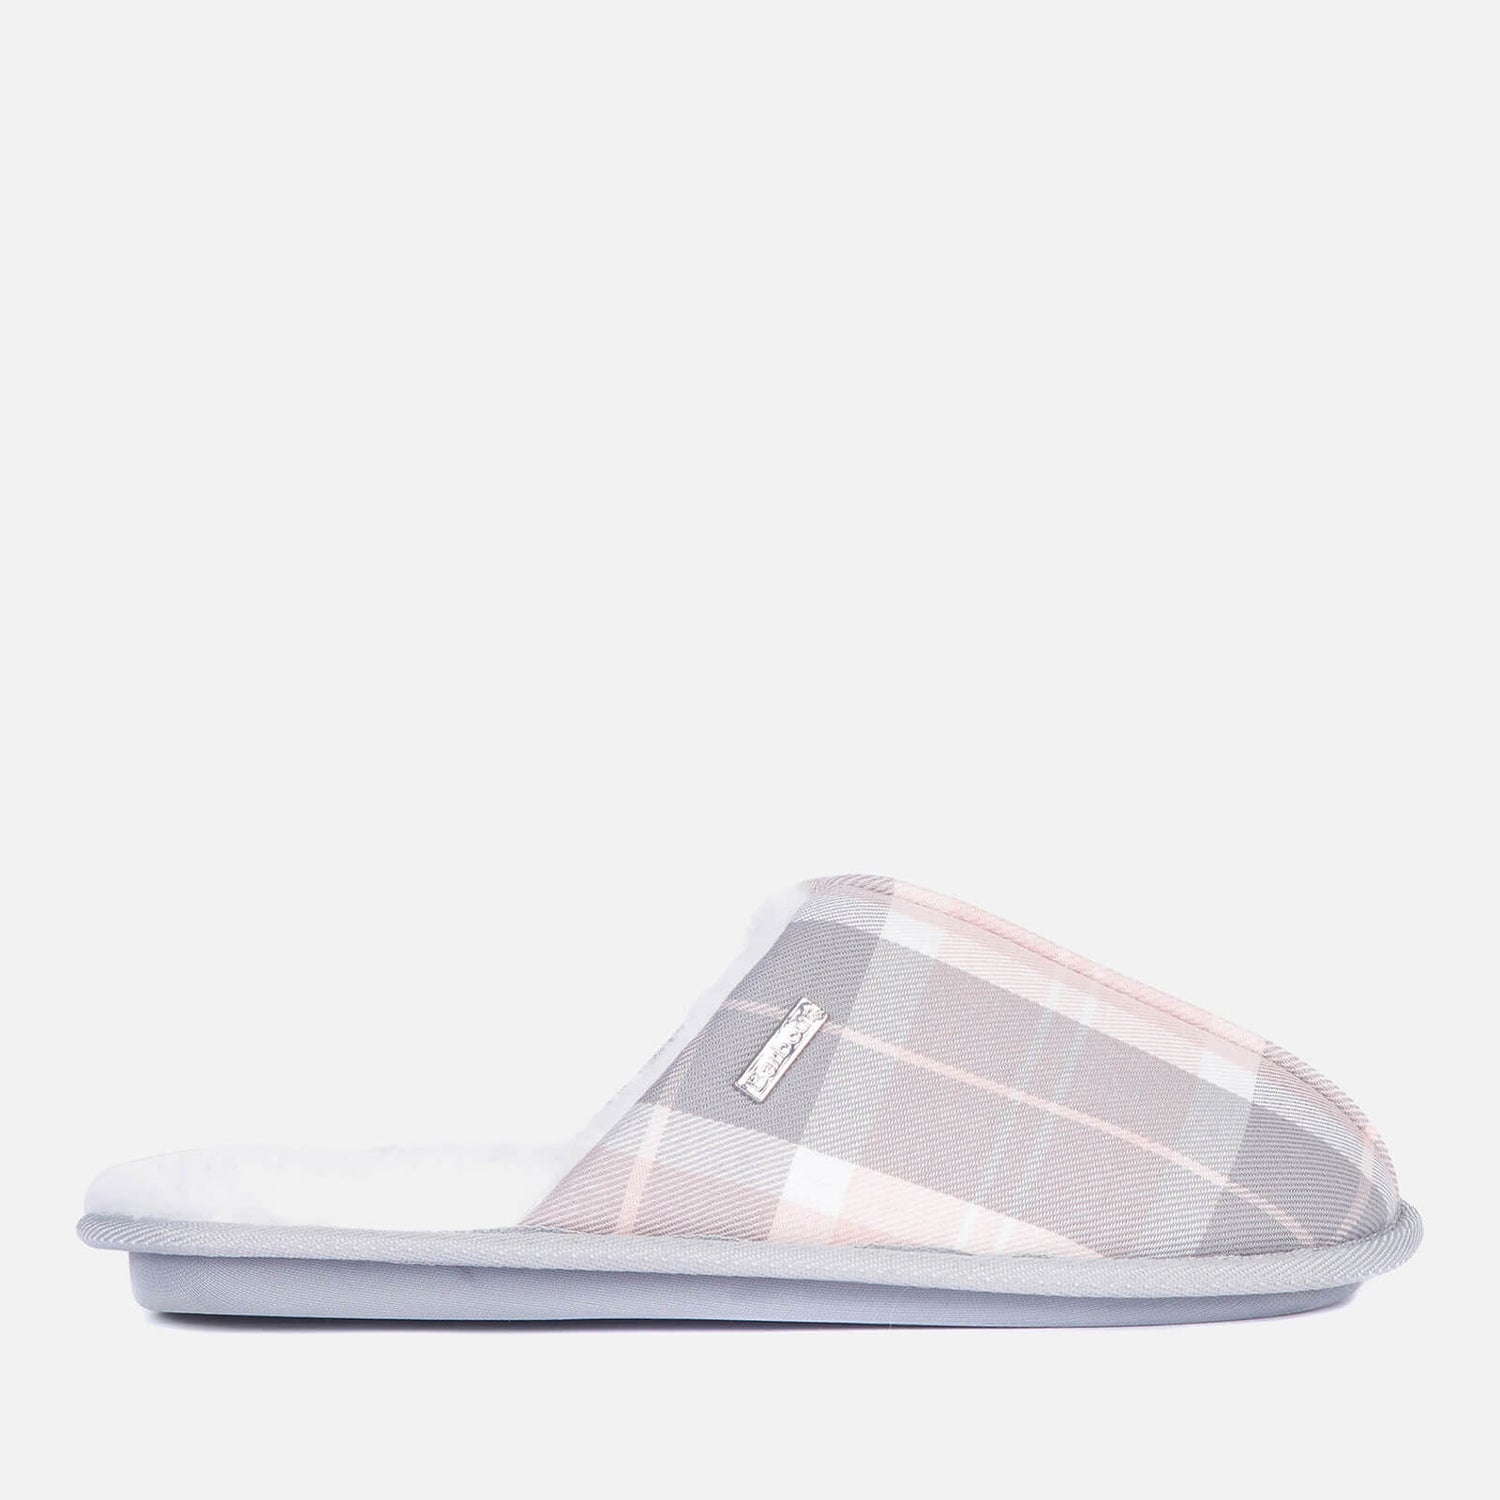 Barbour Women's Maddie Slippers - Recycled Pink/Grey Tartan - UK 3